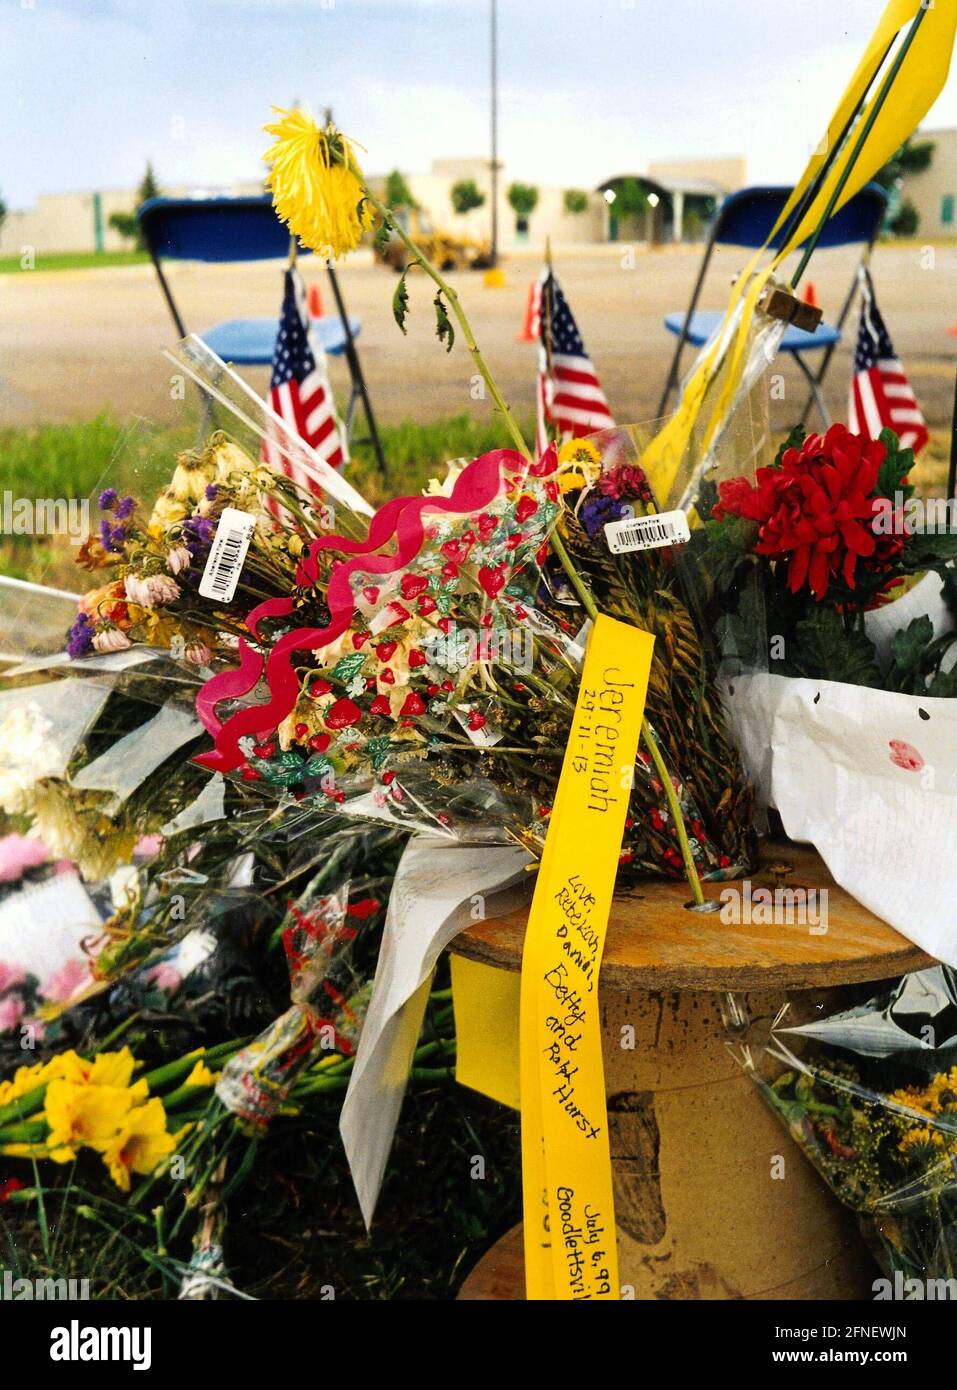 Assassination Memorial at Columbine High School in Littleton (a suburb of Denver), where two students, Eric Harris and Dylan Klebold, killed 12 classmates and a teacher on April 20, 1999. [automated translation] Stock Photo